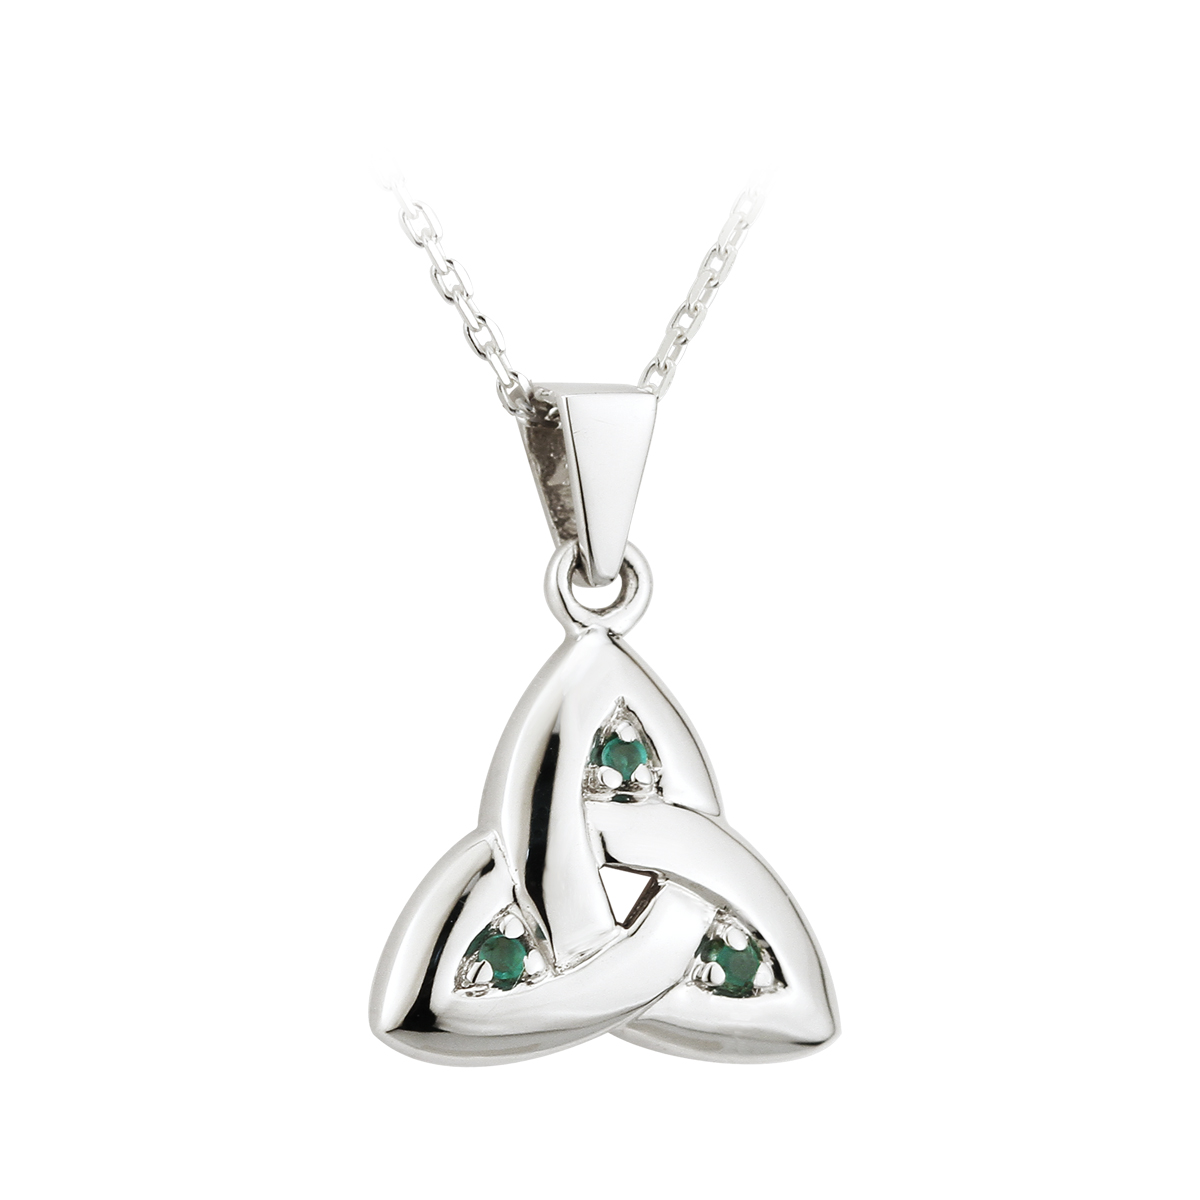 Product image for Irish Necklace - 14k White Gold Trinity Knot with Emeralds Pendant with Chain